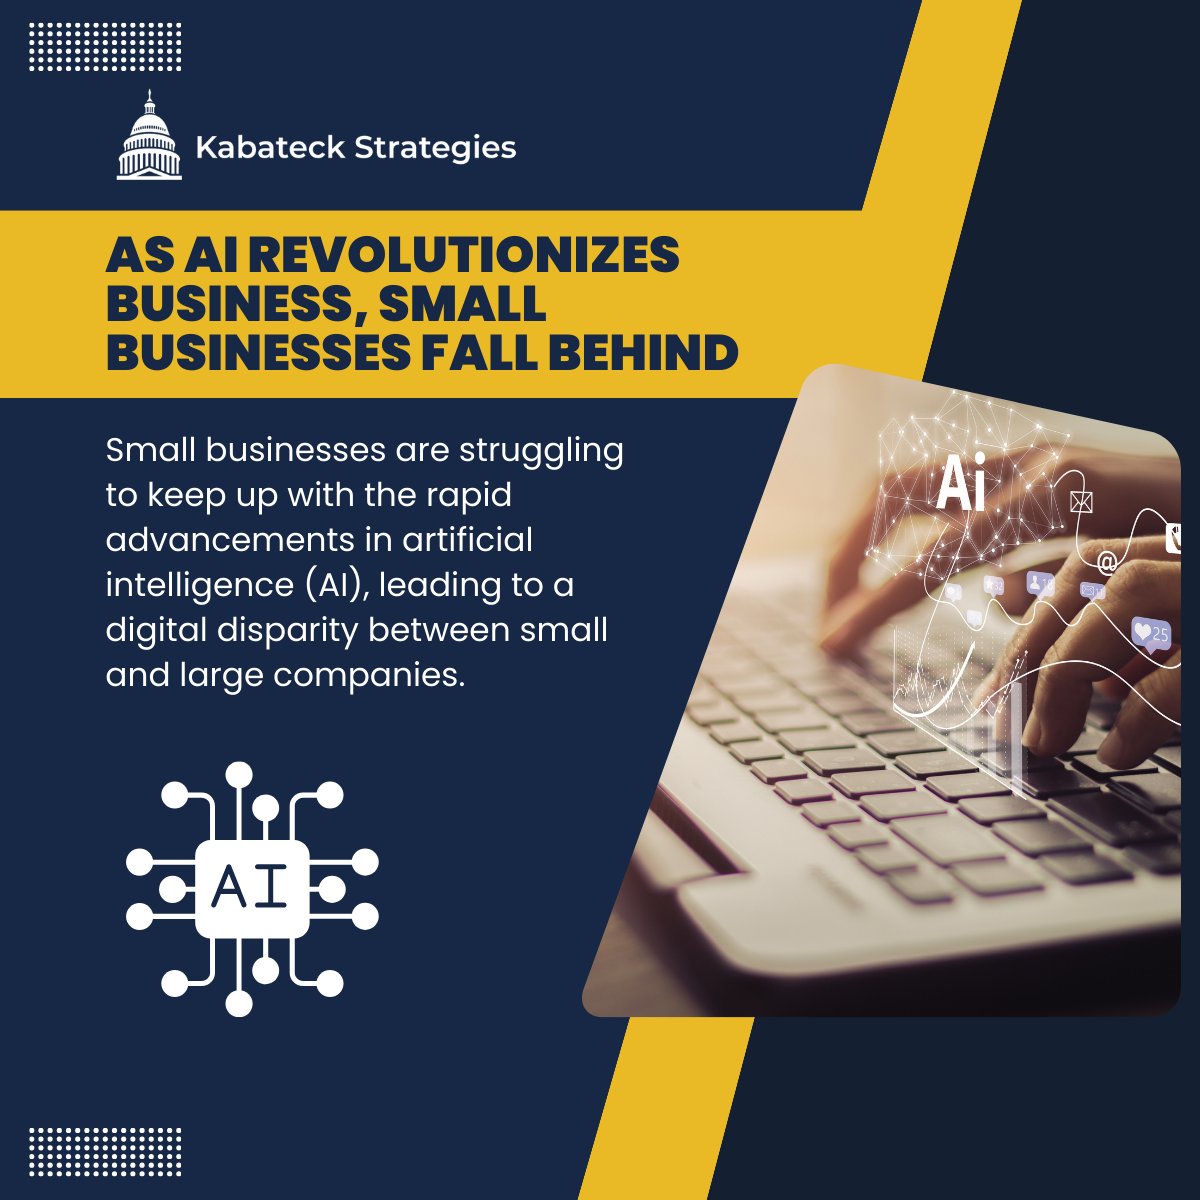 Small businesses are struggling to keep up with the rapid advancements in artificial intelligence (AI), leading to a digital disparity between small and large companies.

Learn more: pxl.to/nyaib29

#DigitalDivide #SmallBusinessAI #AIAdoption #TechAccessibility